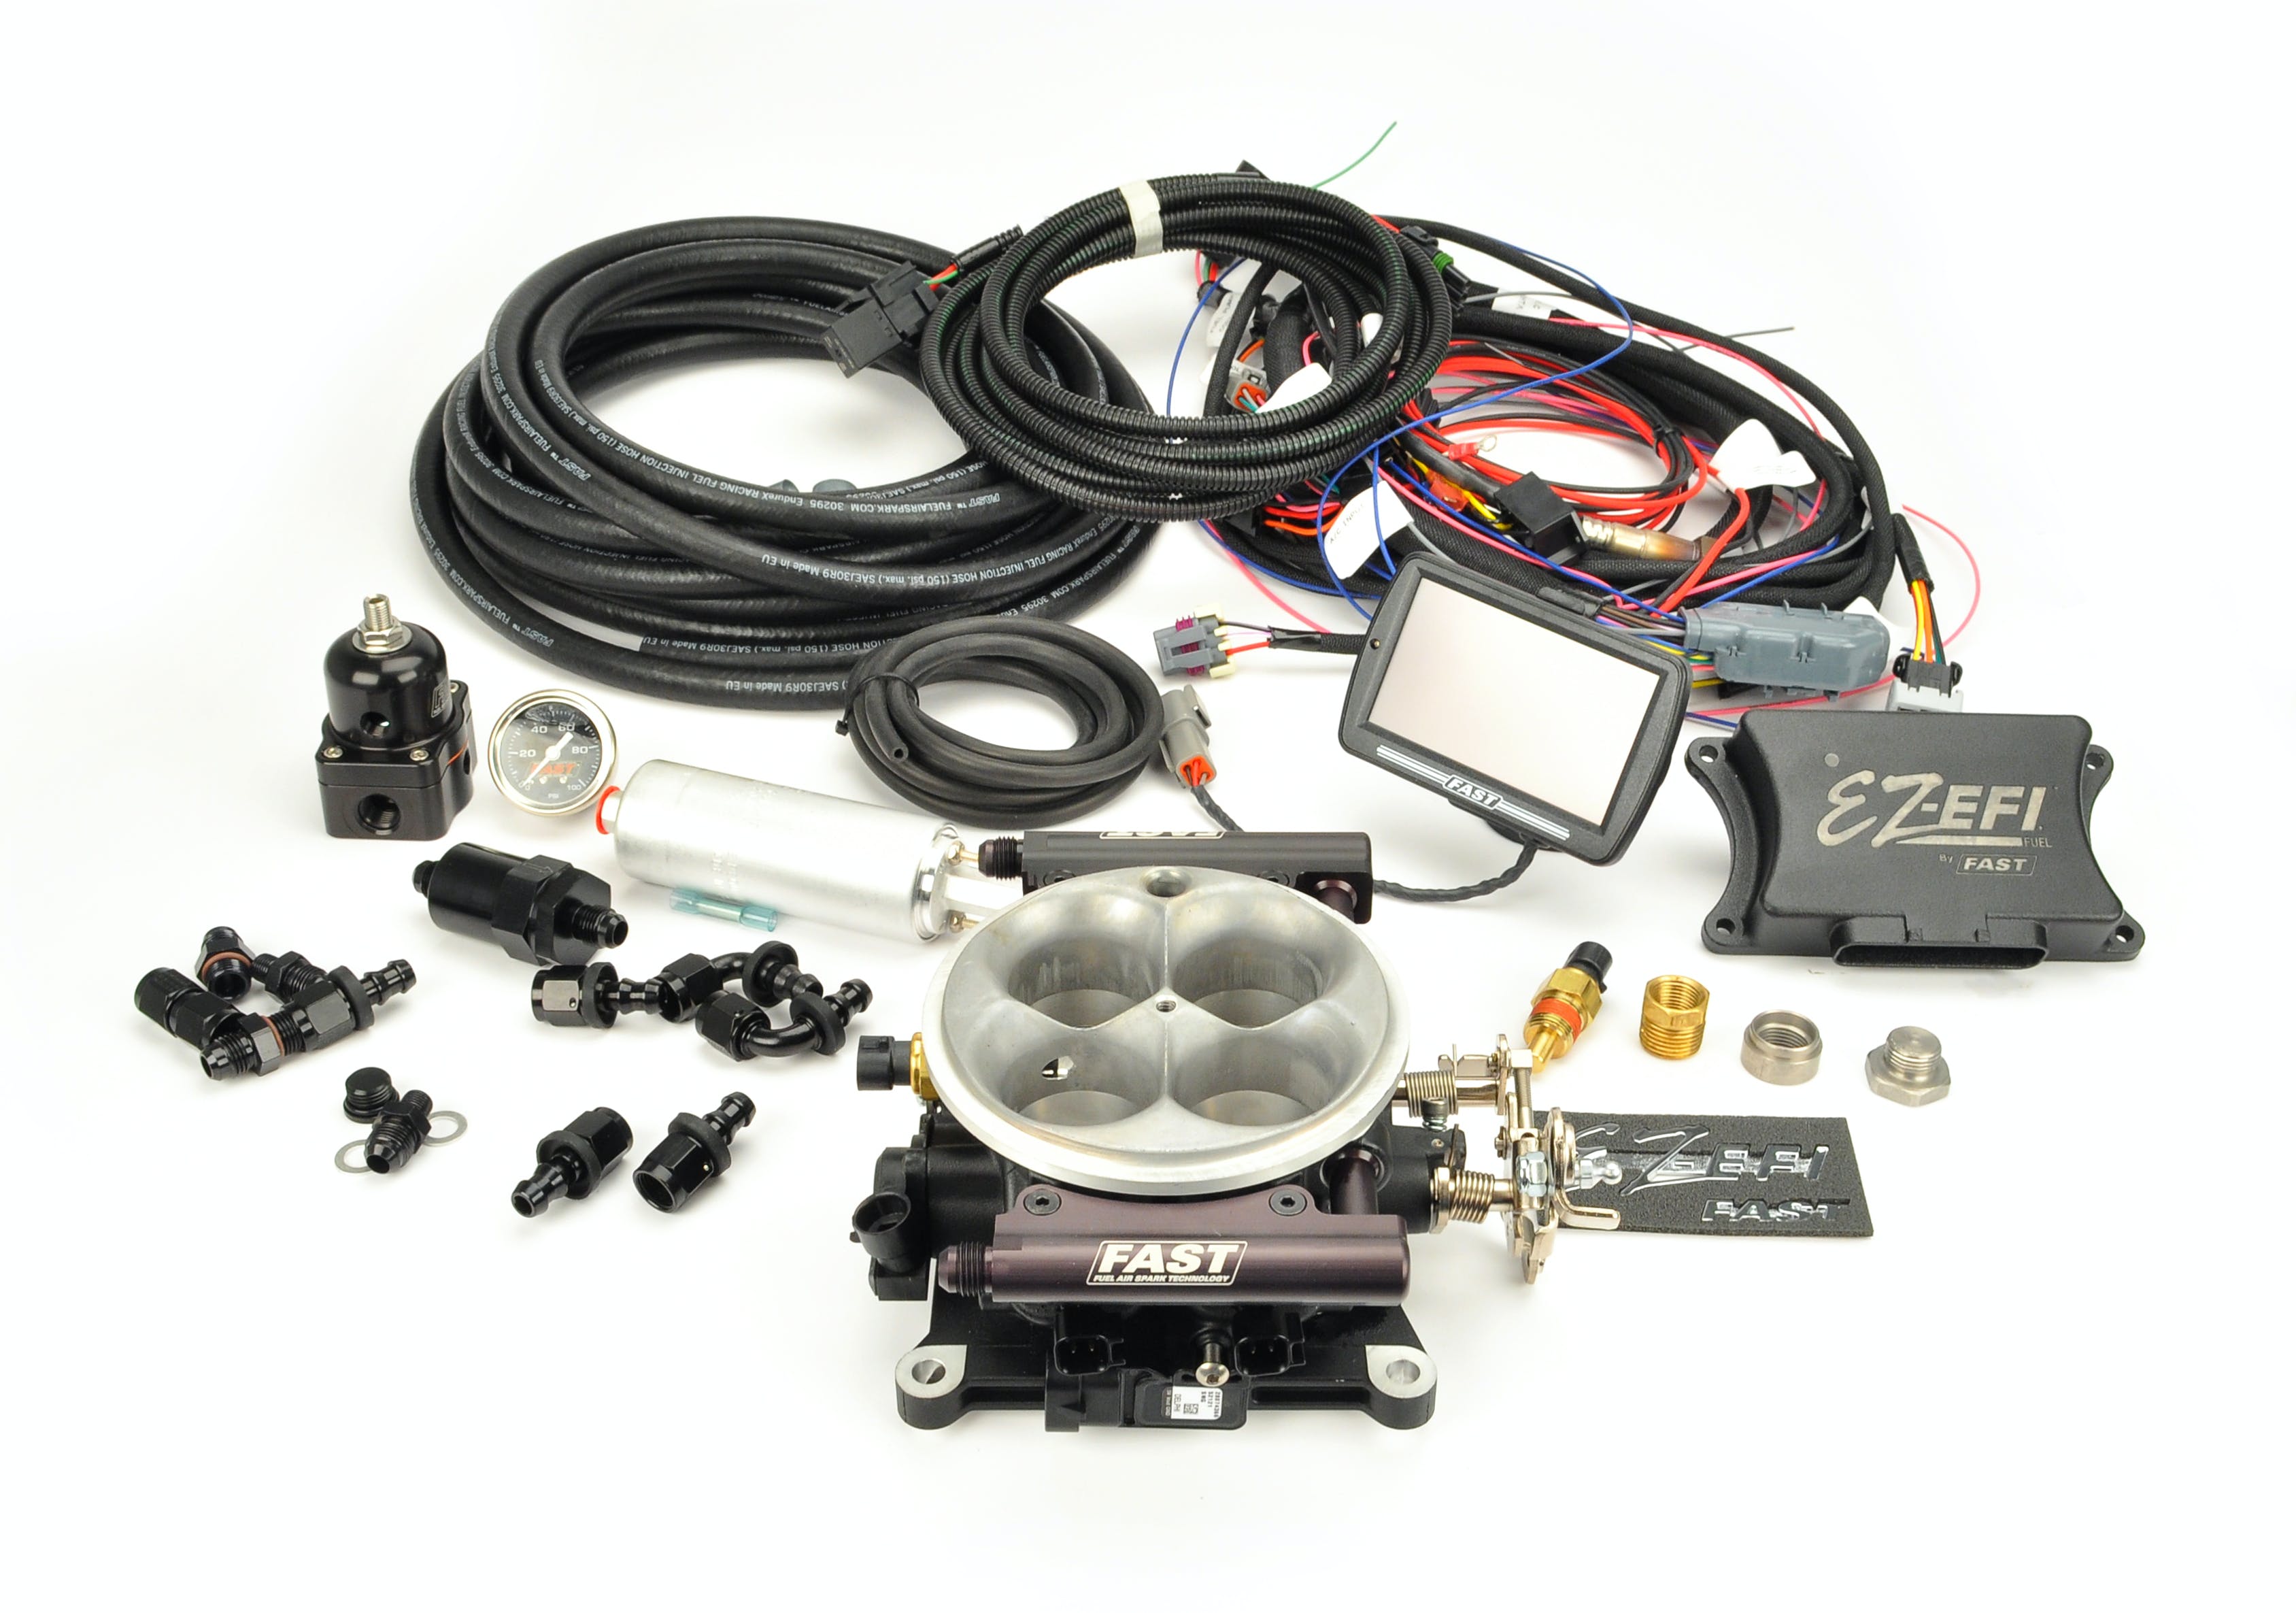 FAST - Fuel Air Spark Technology 30227-06KIT EZ Fuel Self-Tuning Throttle Body Injection Kit w/ Inline Fuel Pump